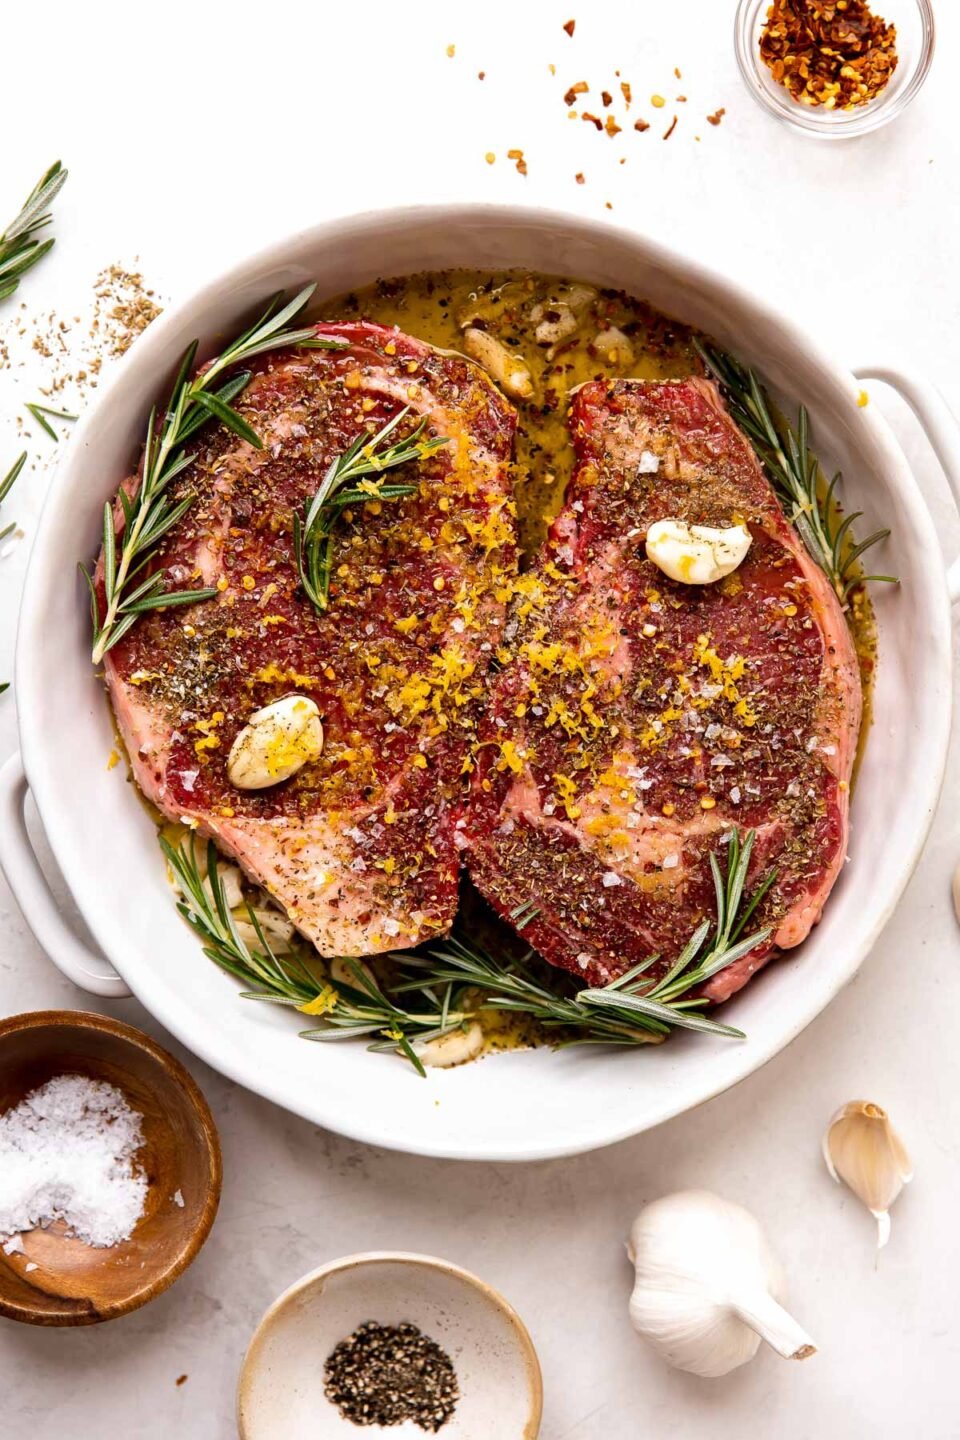 How to make Tuscan style steak: two steaks marinate in a Tuscan-style marinade made with olive oil, lemon zest, garlic, fresh rosemary, dried oregano, and crushed red pepper flakes. The steaks marinate inside of a double handle baking dish that sits atop a creamy white textured surface surrounded by a bulb of garlic and three small pinch bowls filled with crushed red pepper flakes, kosher salt, and ground black pepper.